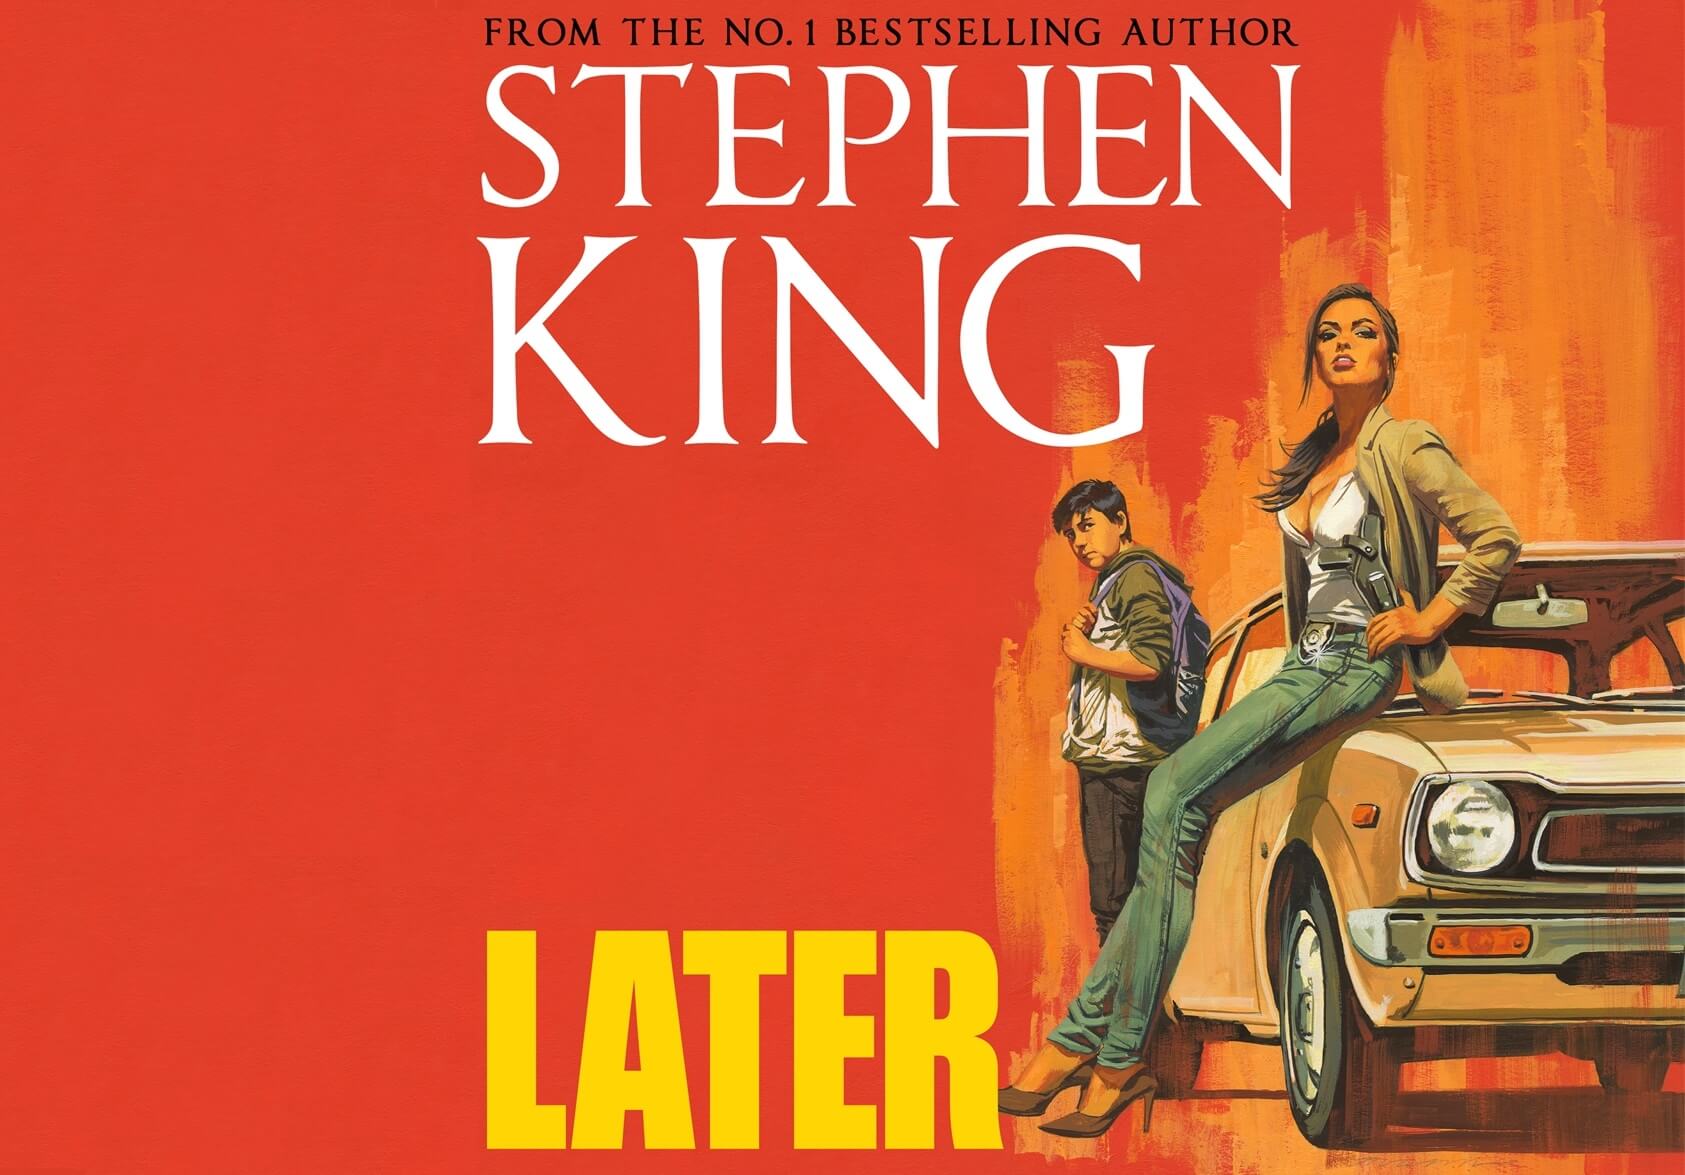 2021 novel Later by Stephen King adapted by Blumhouse